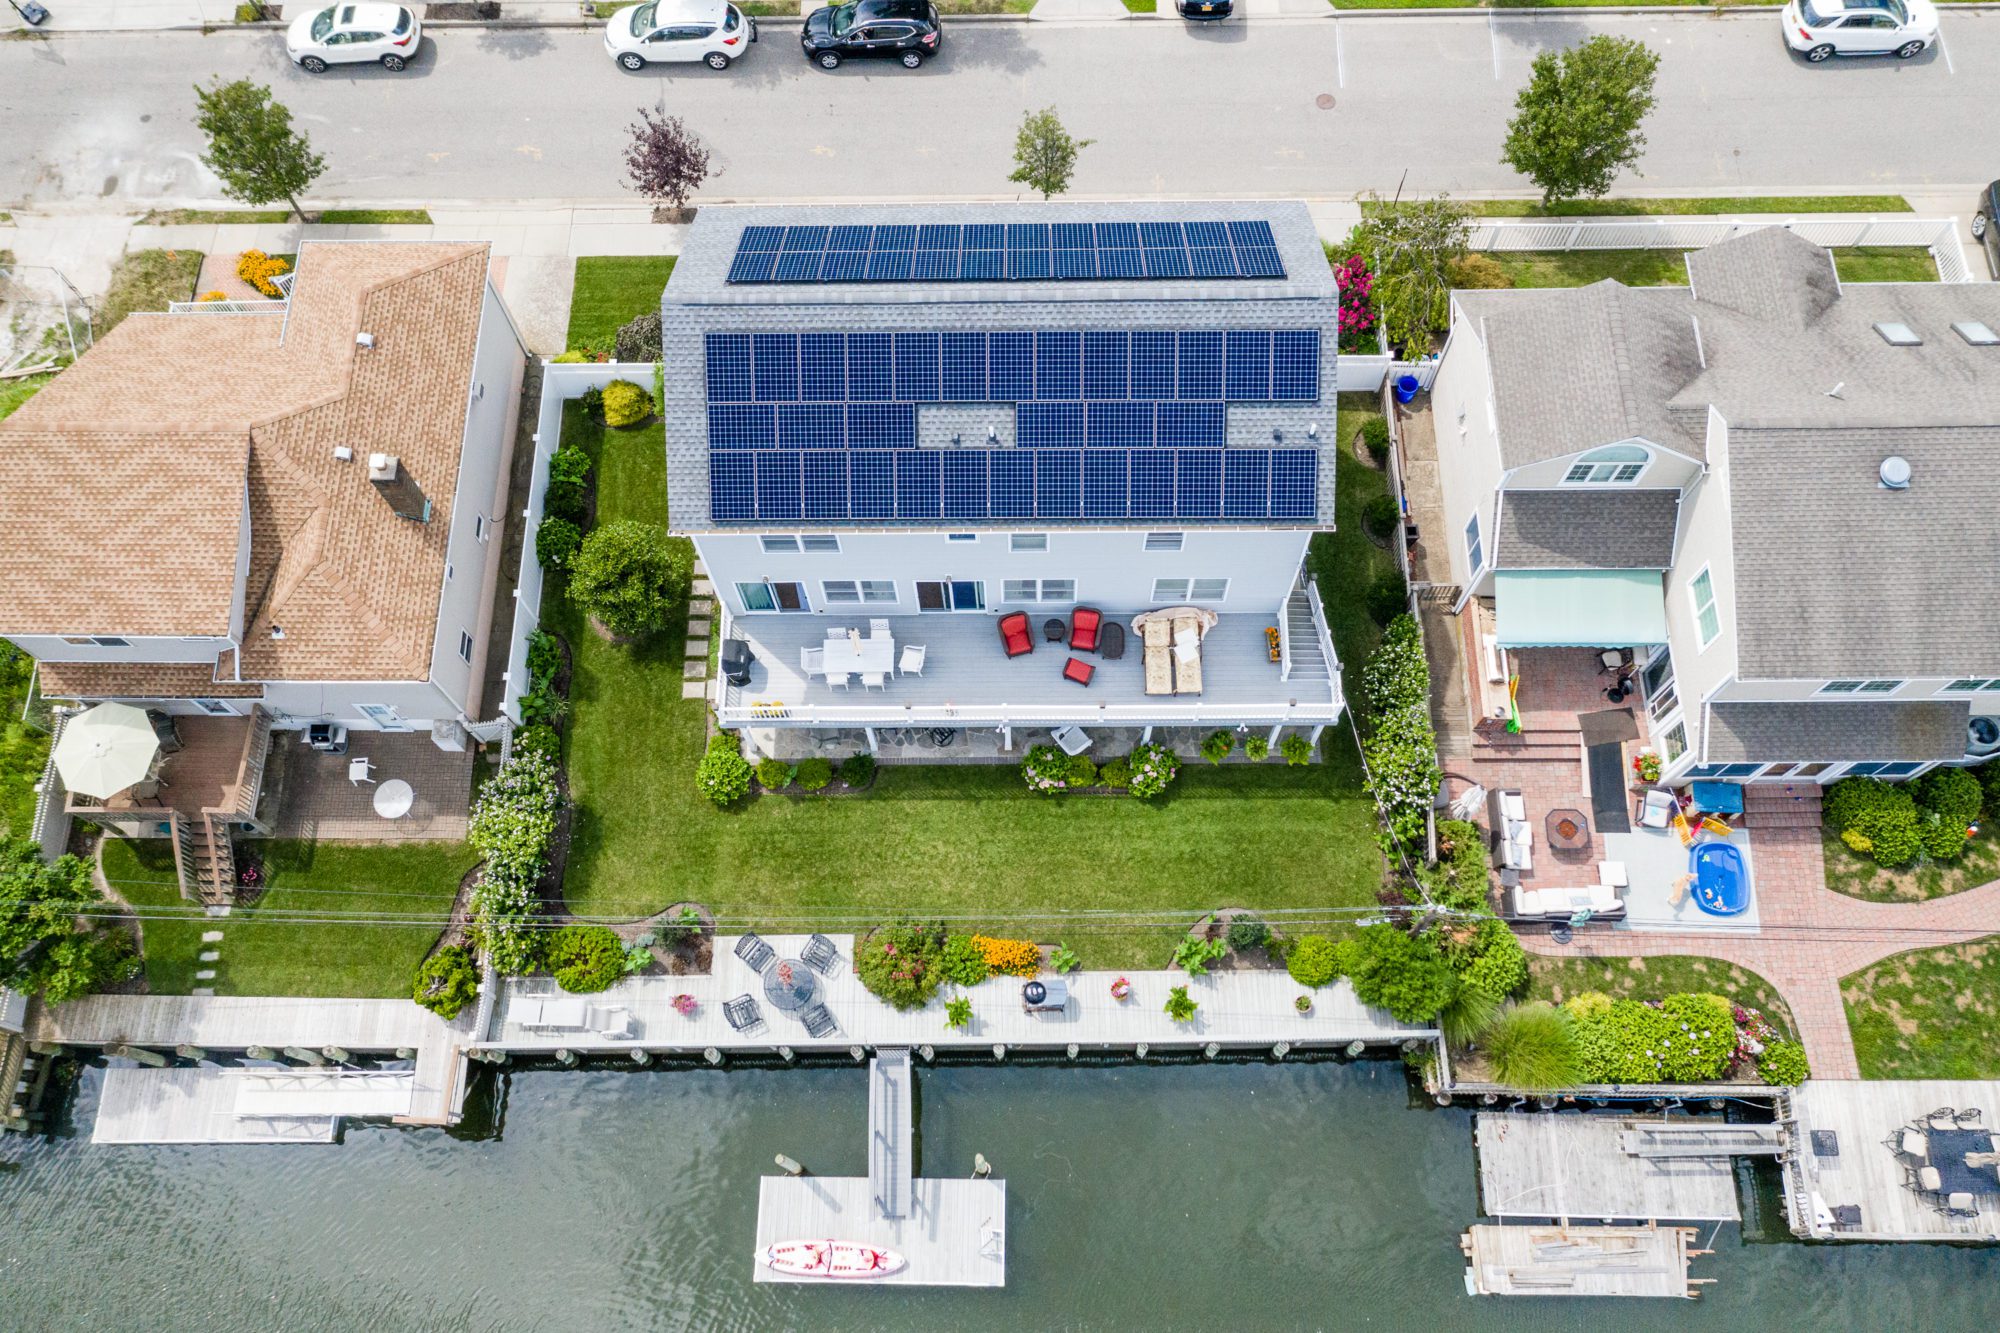 A waterfront house on Long Island has solar panels on the roof to generate clean energy.